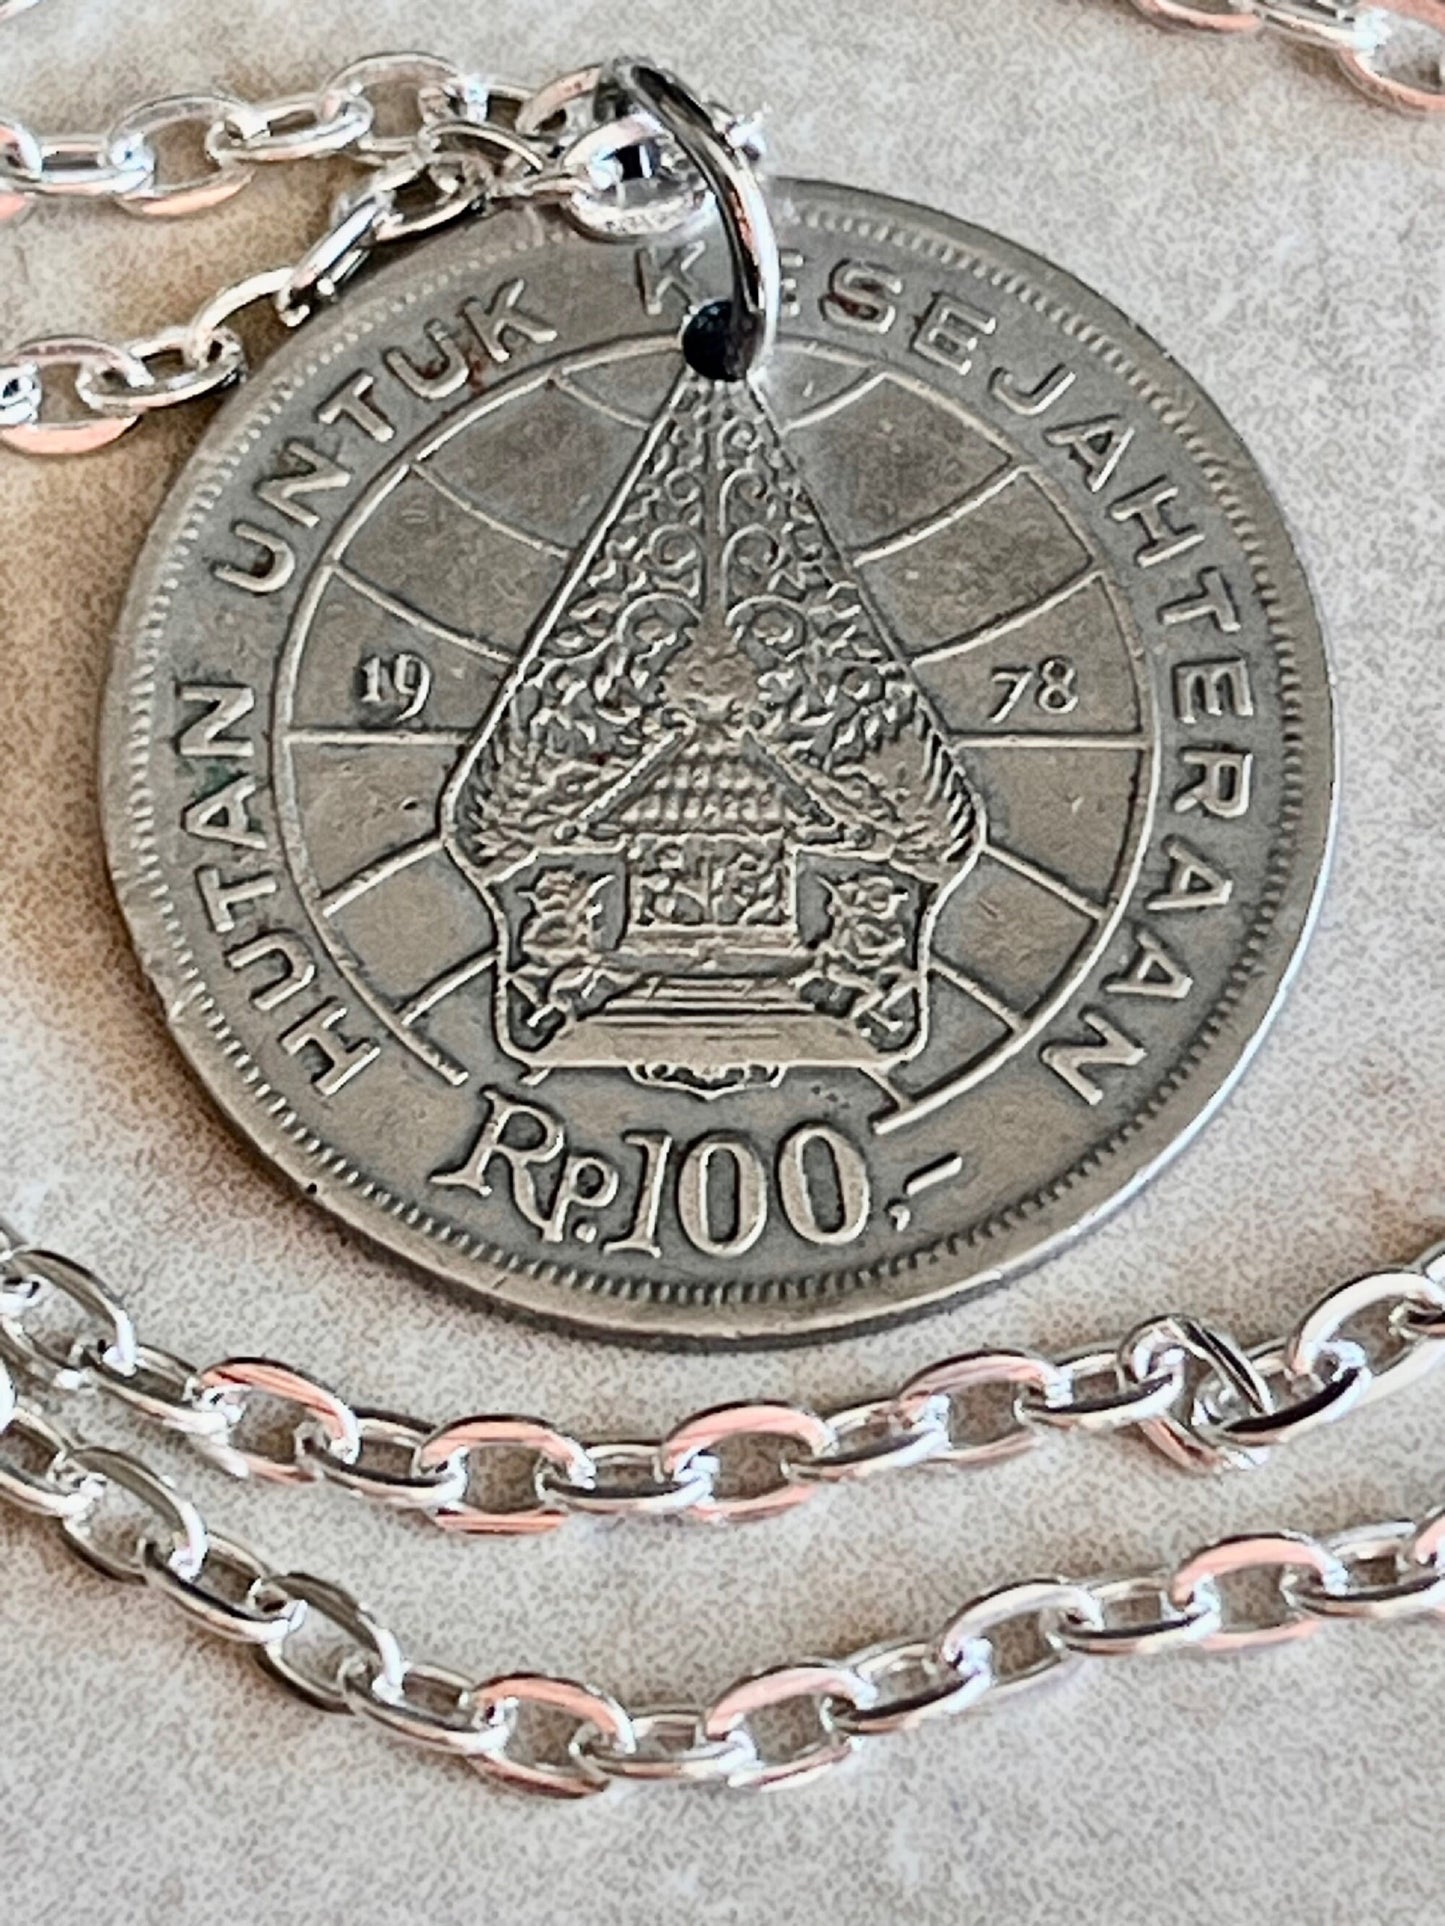 Indonesia Pendant Necklace Indonesian 100 Rupiah Coin Personal Vintage Handmade Jewelry Gift Friend Charm For Him Her World Coin Collector